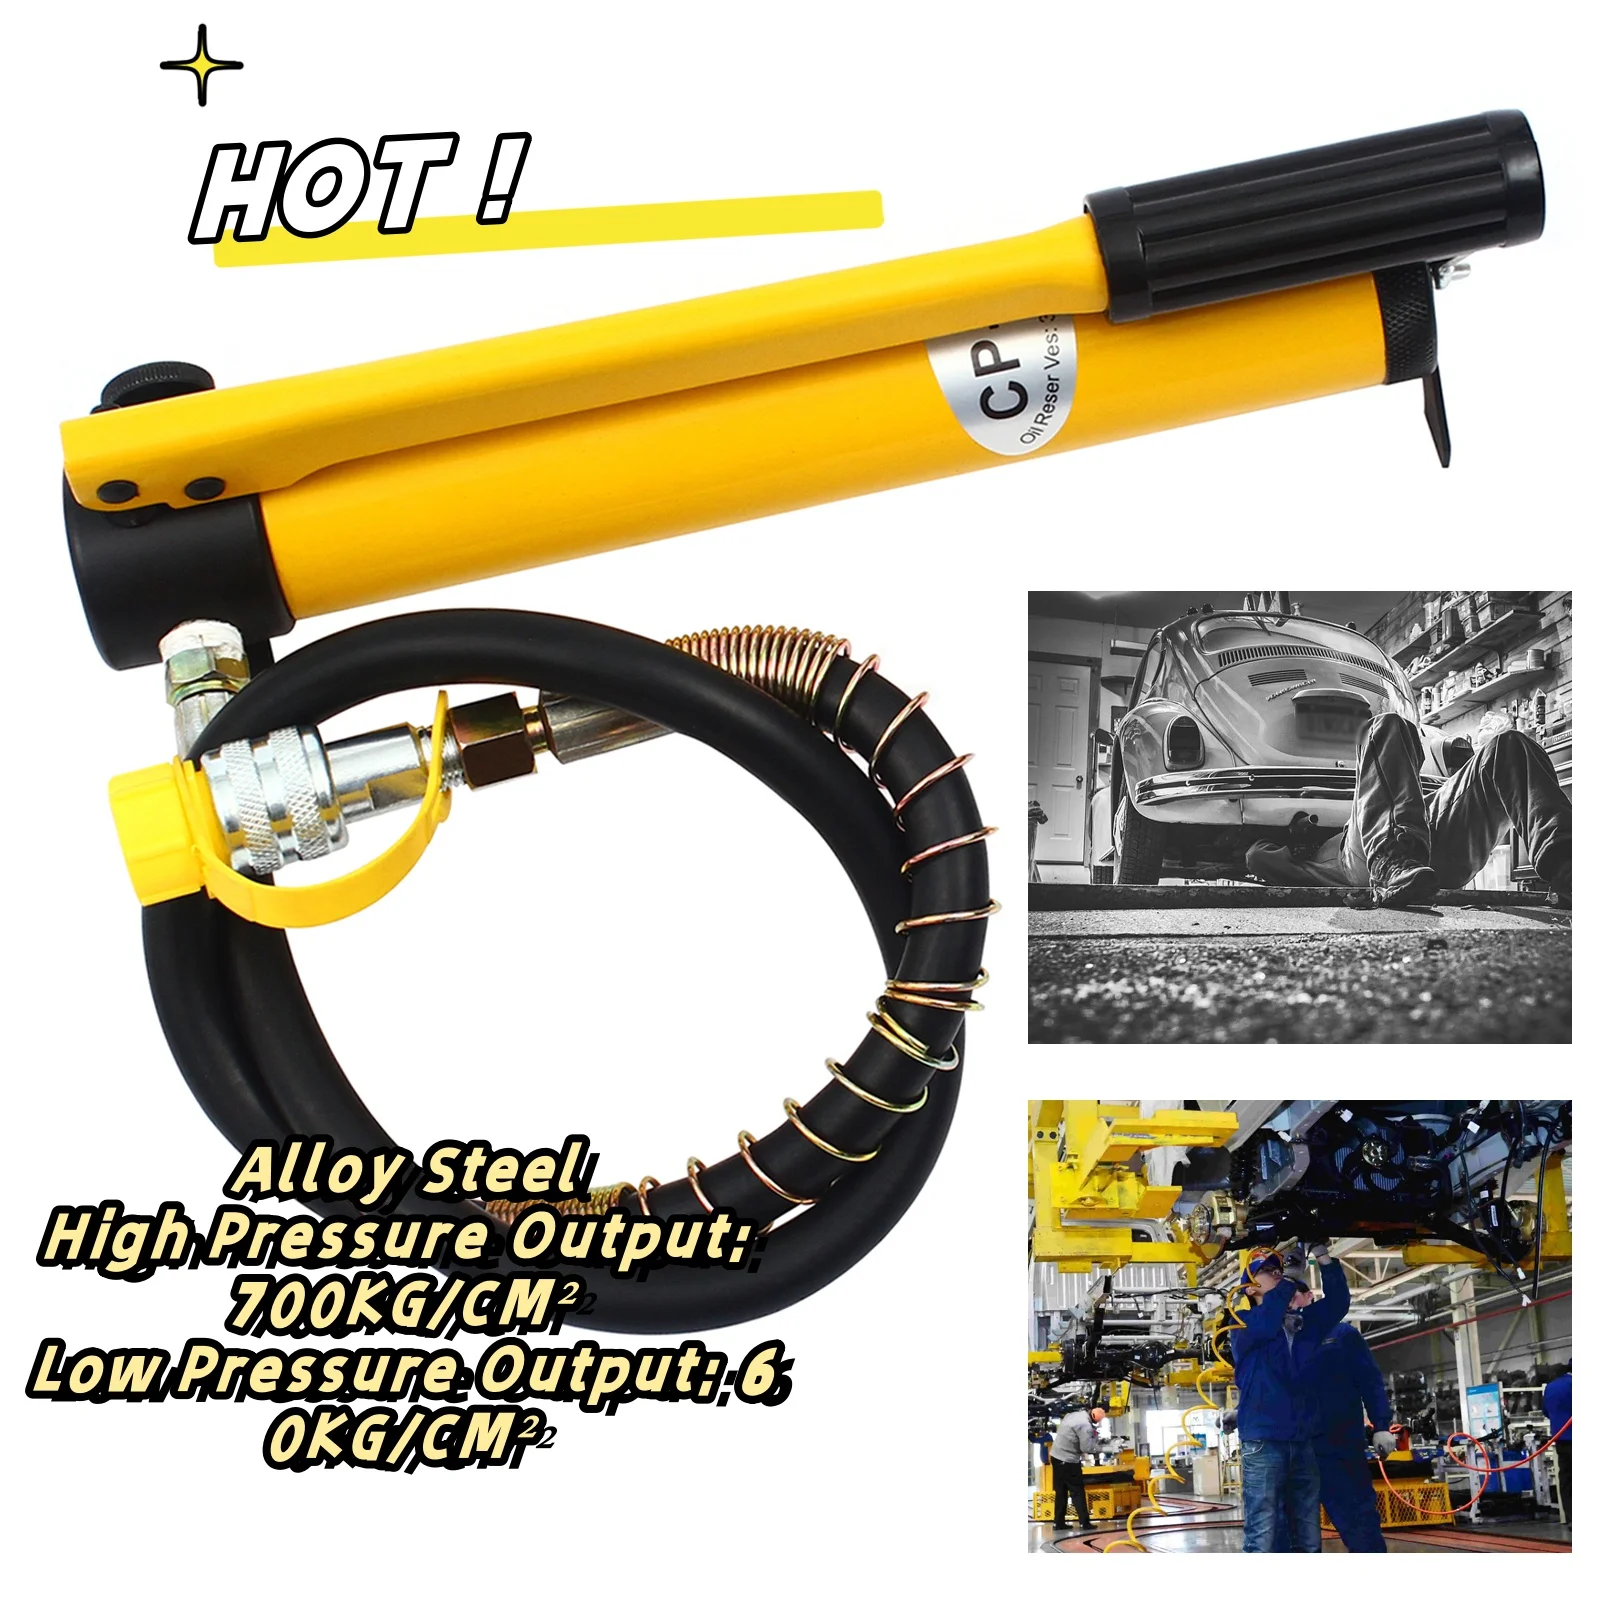 10 Ton Hydraulic Hand Pump High Pressure Hand Operated Pump w/ Steel Balls & Sealing Ring 10000Psi 1pcs polyurethane hydraulic cylinder oil sealing ring un uhs u y type shaft hole general sealing ring gasket thickness 15mm 16mm